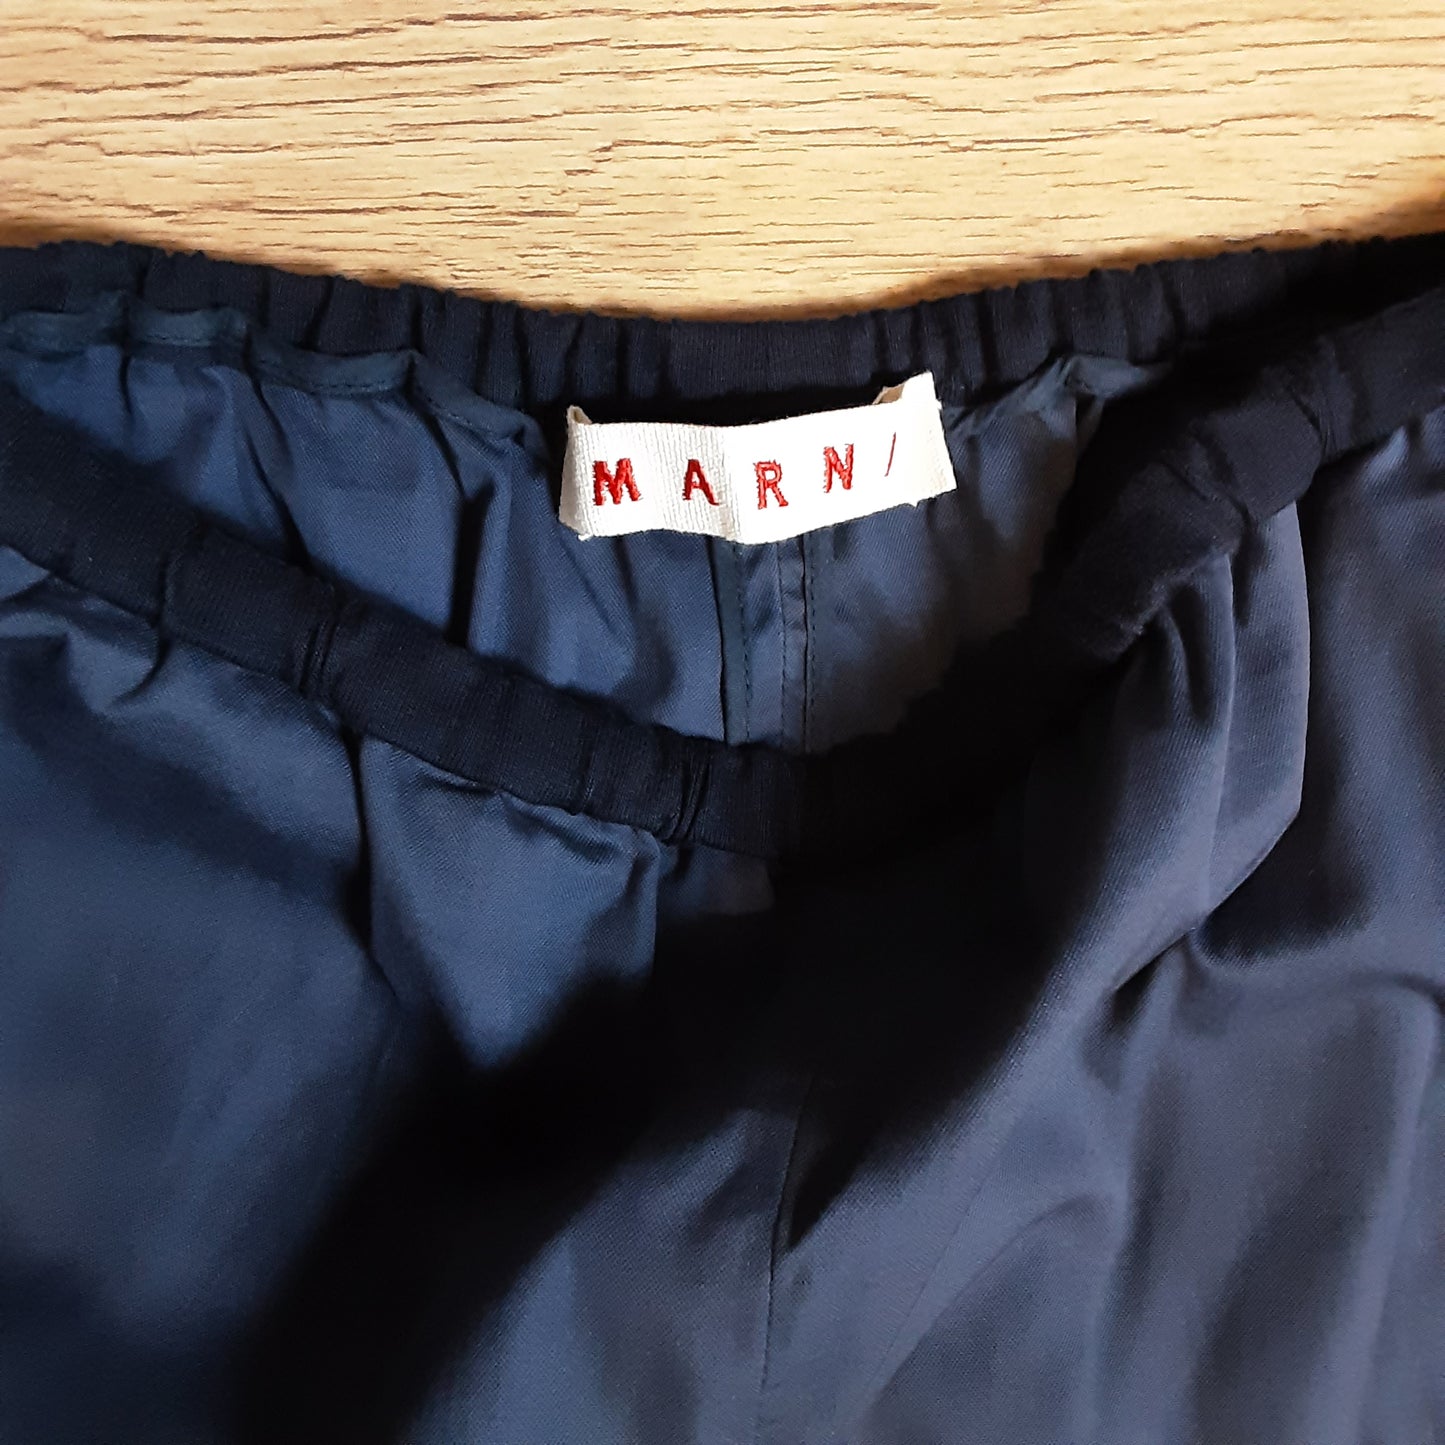 Marni Cotton and Silk Navy Trousers Size 10